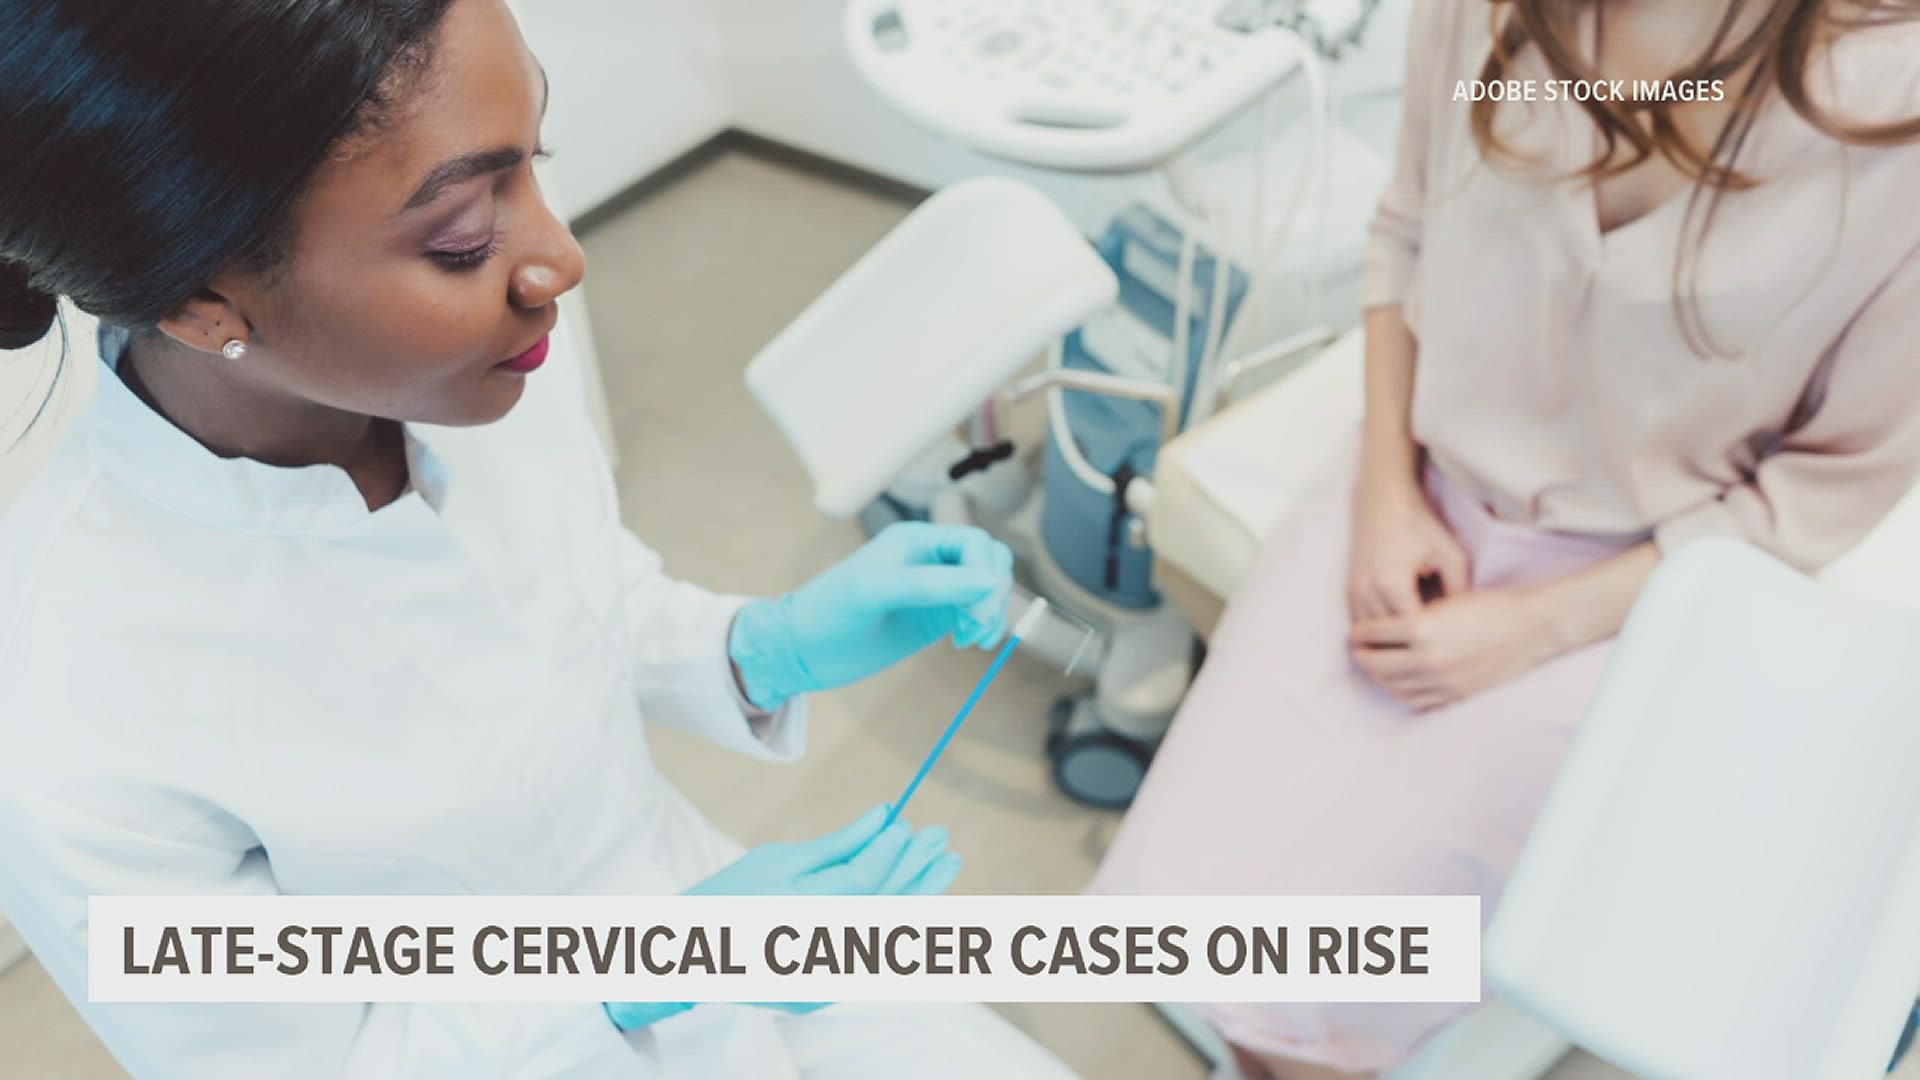 From school starting, to Penn State's new grant, to cervical cancer cases rising, FOX43 has got a roundup of health topics you should be paying attention to.